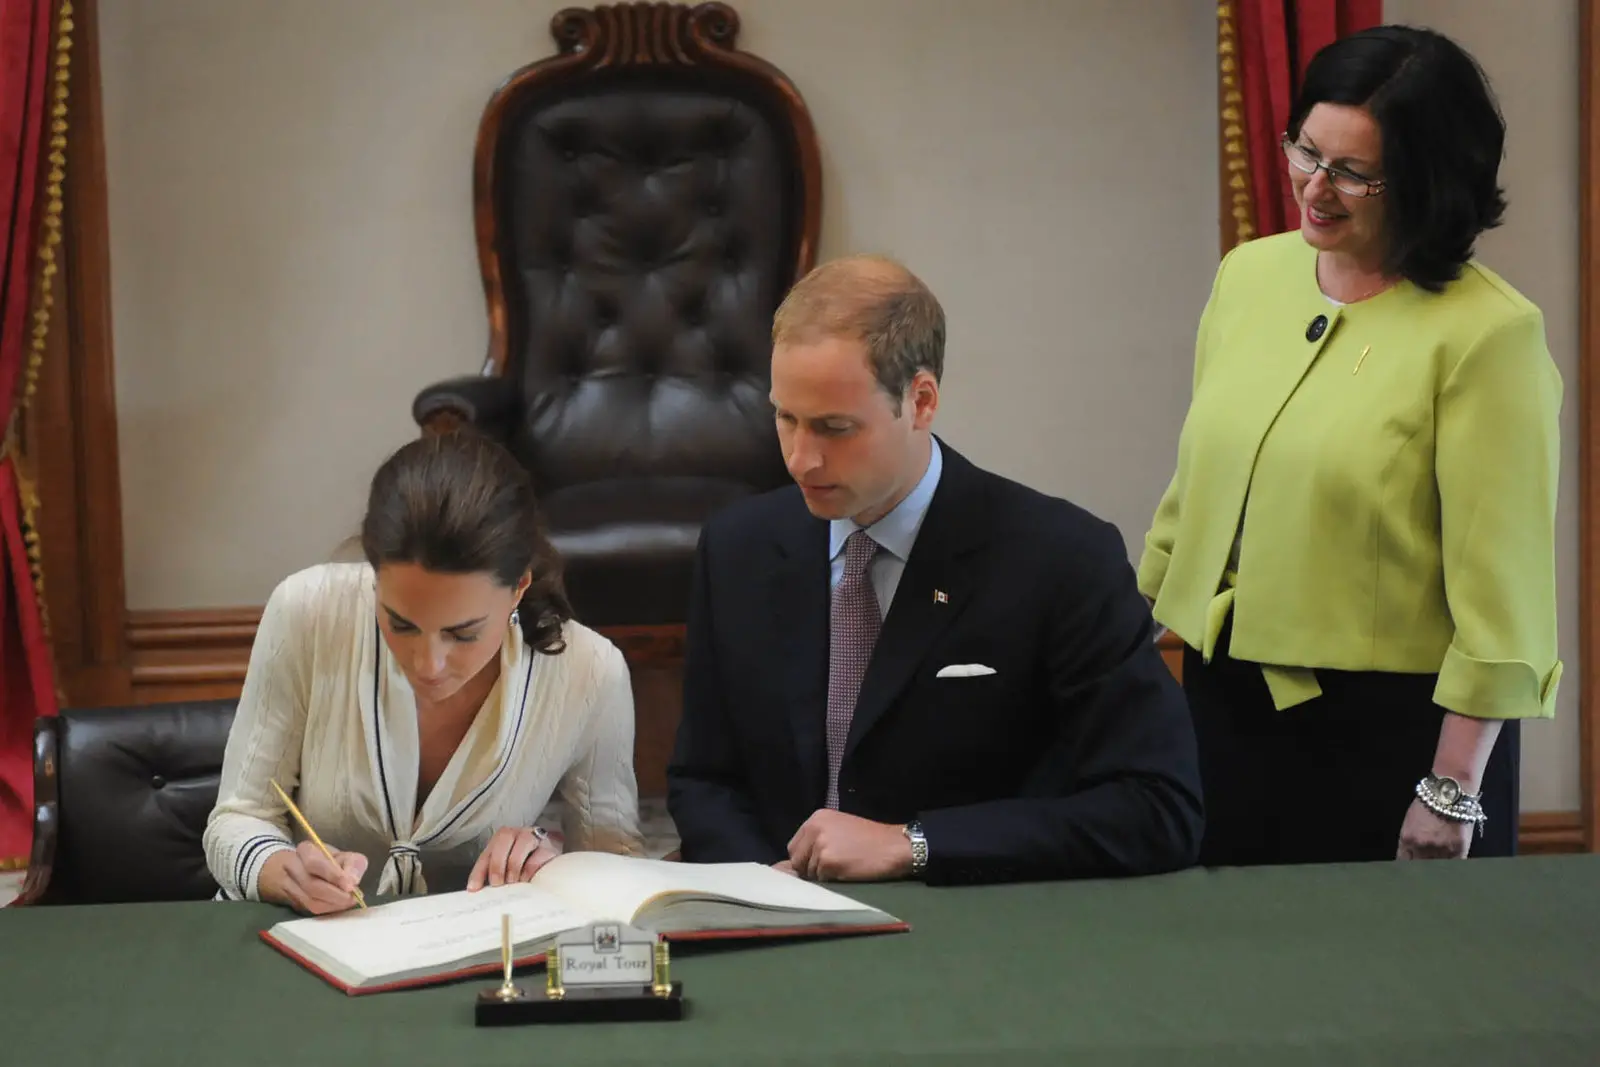 The Duke and Duchess of Cambridge signed a visitor book in Charlottetown during Canada tour 2011